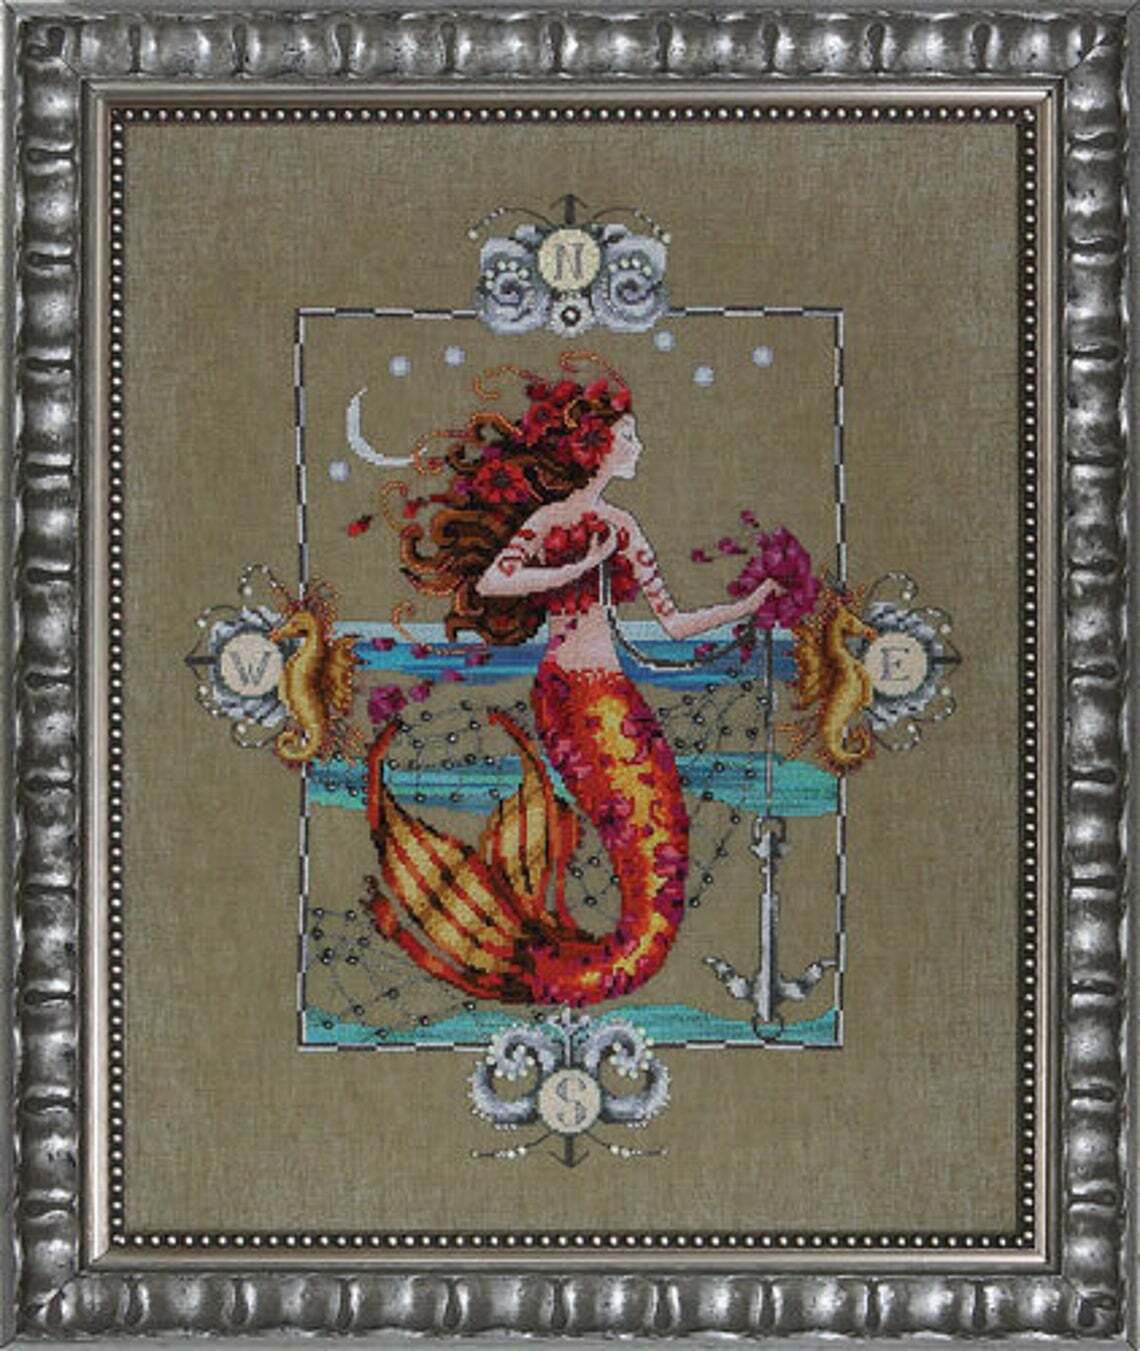 Primary image for Mirabilia MD126 "GYPSY MERMAID" CHART & EMBELLISHMENT + SPECIAL THREADS